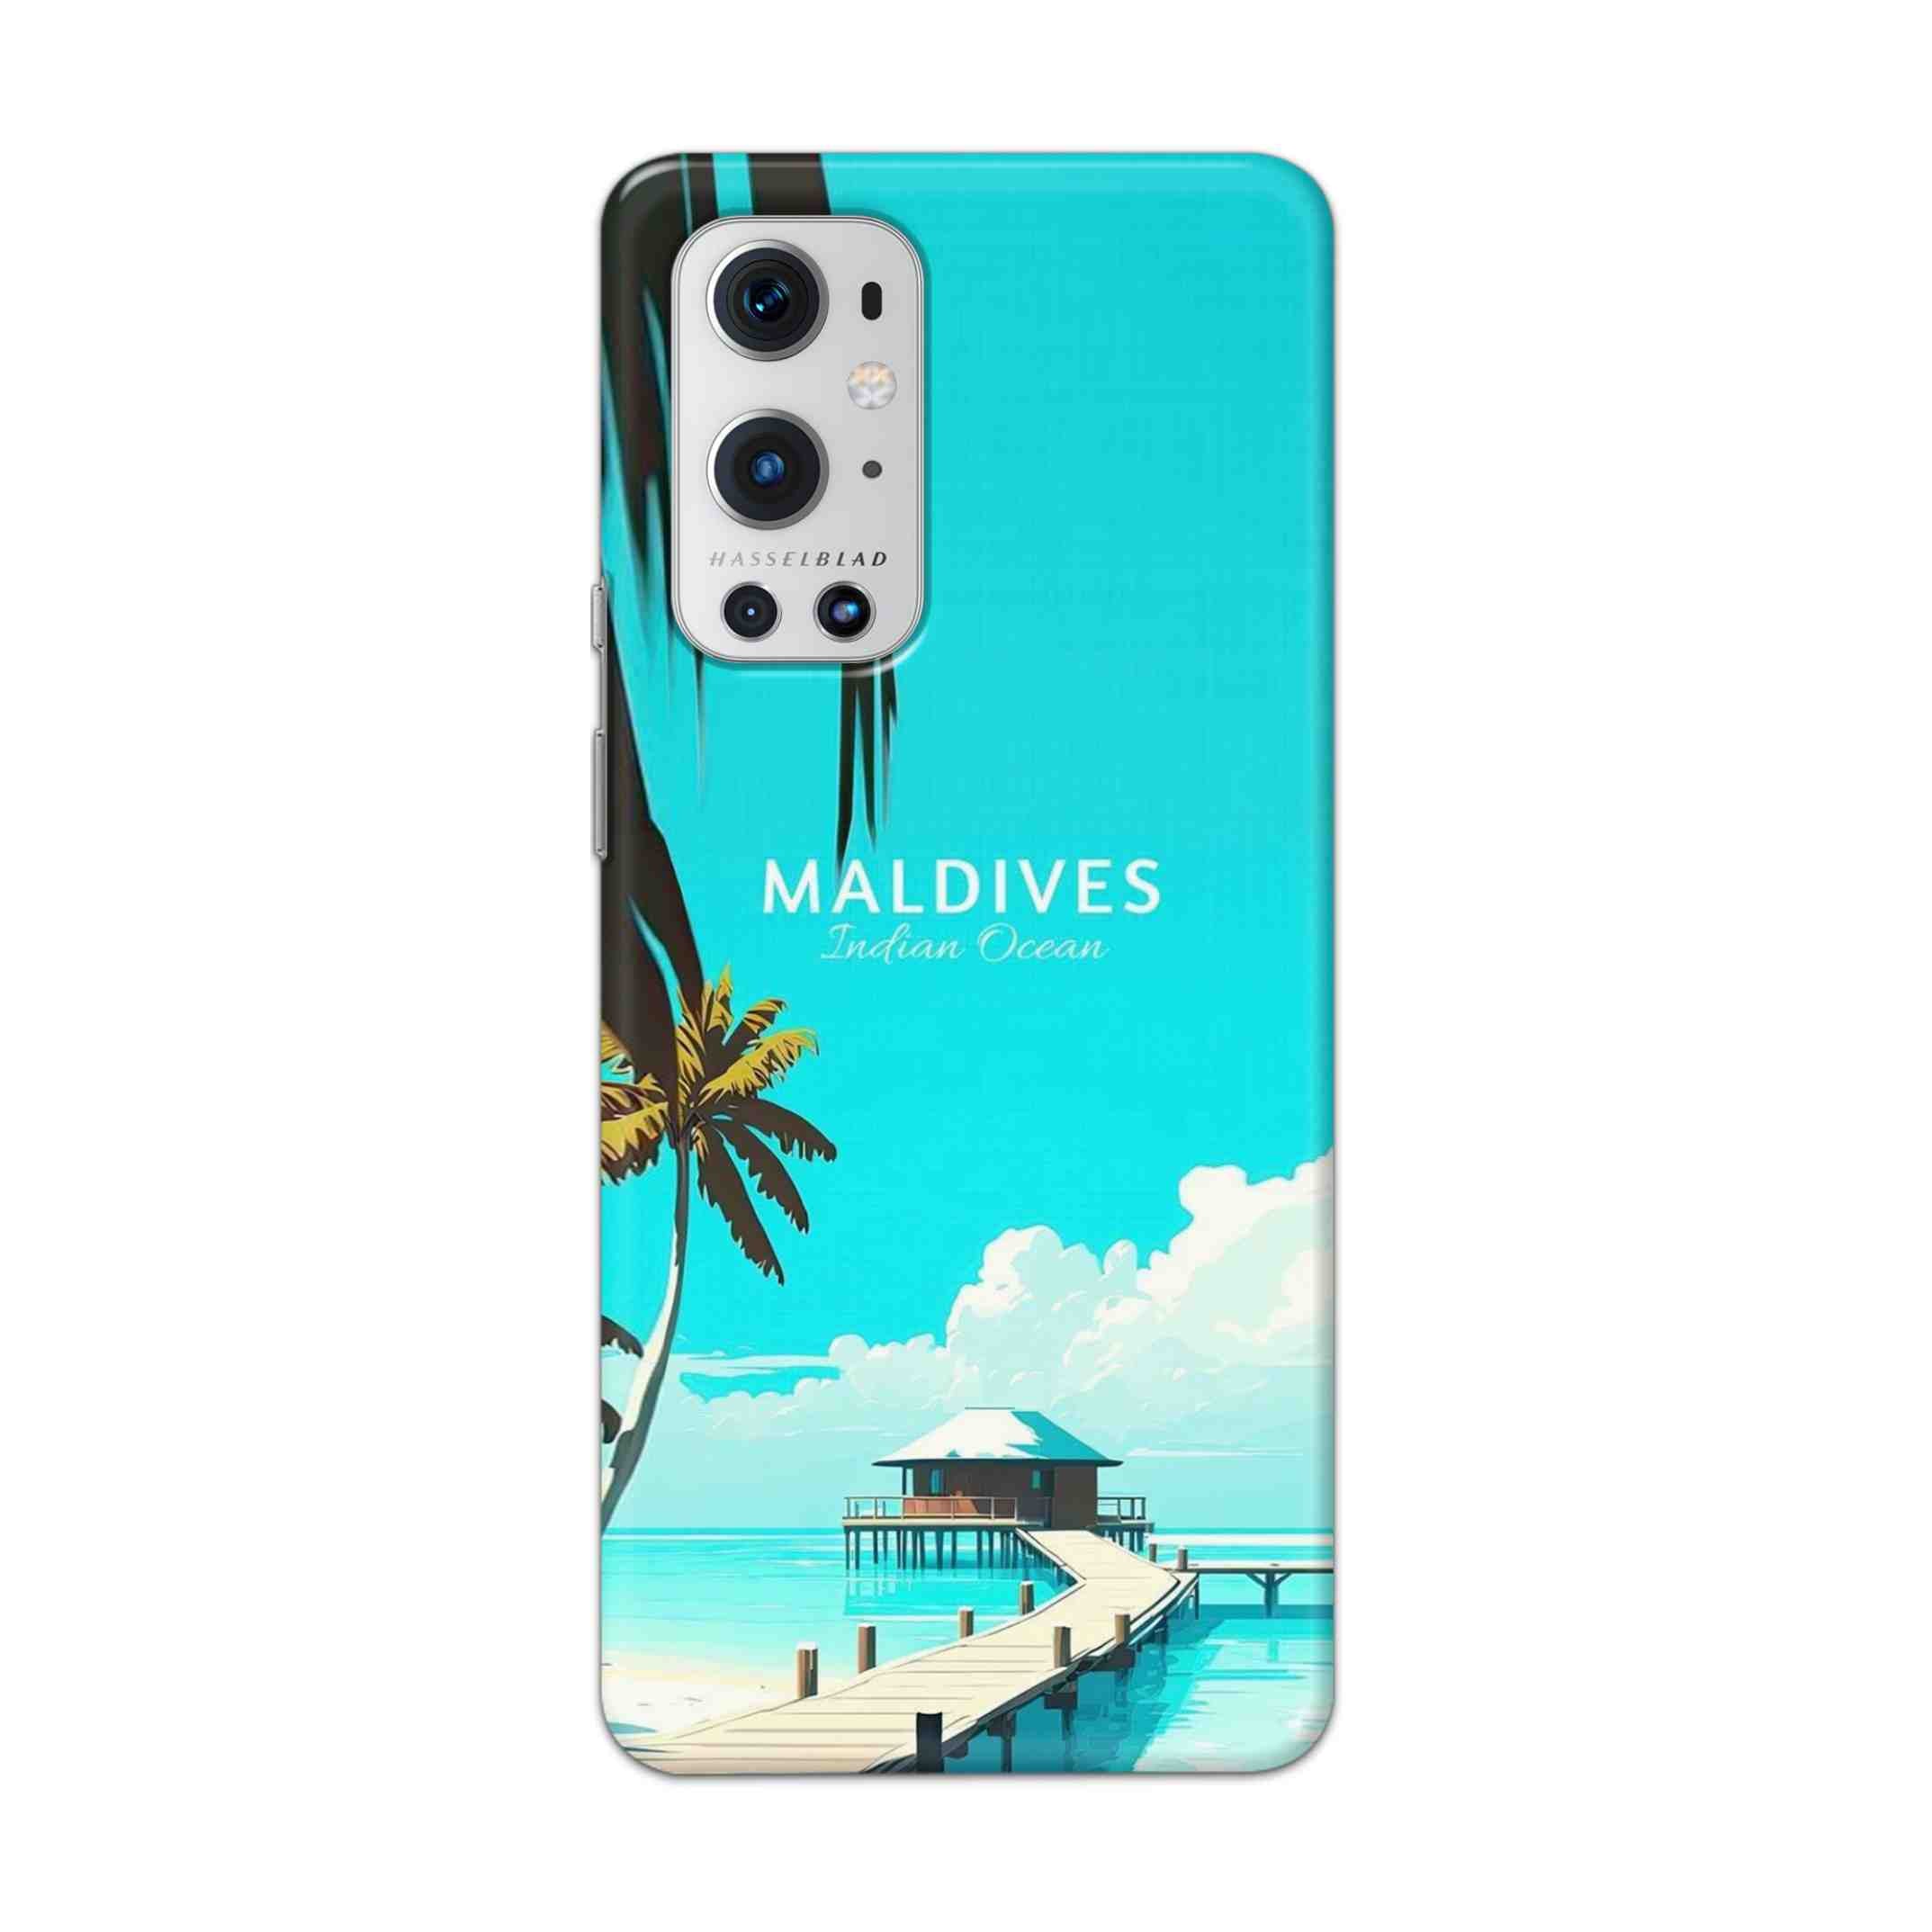 Buy Maldives Hard Back Mobile Phone Case Cover For OnePlus 9 Pro Online